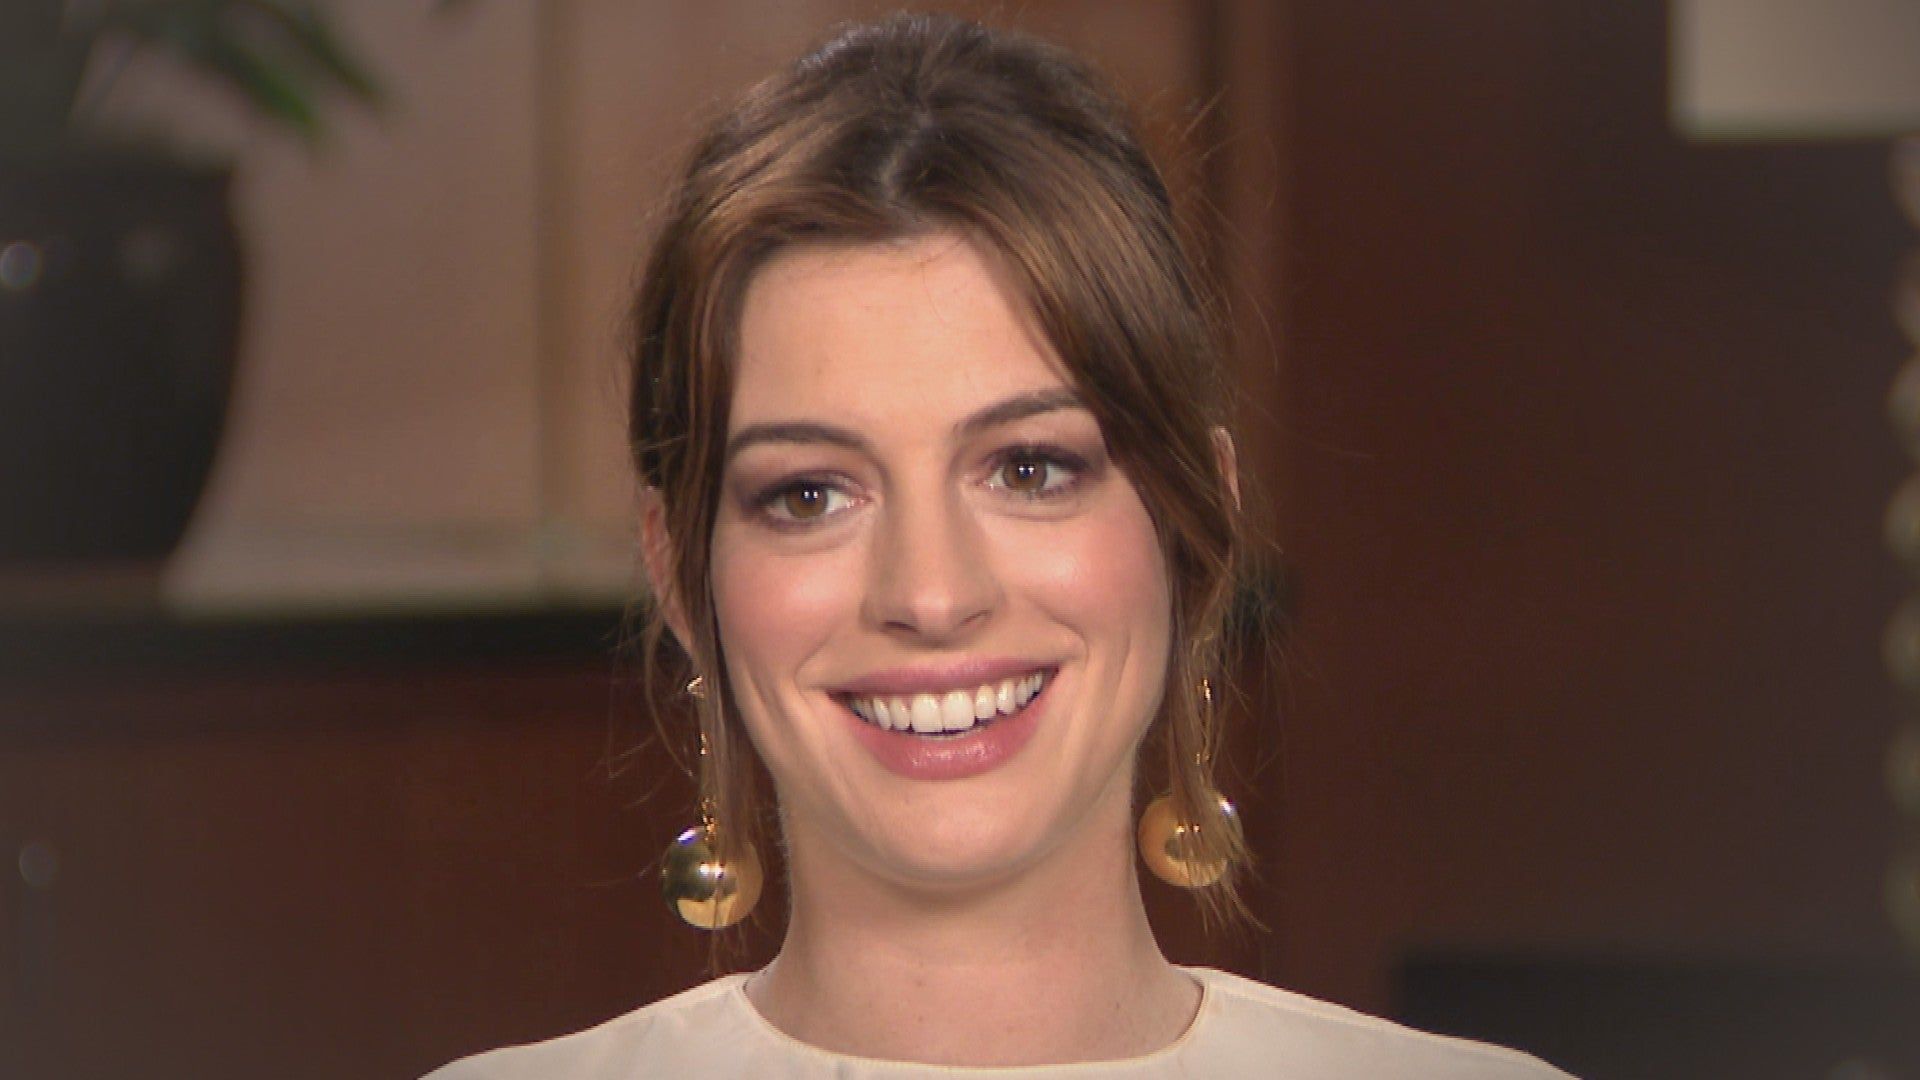 Anne Hathaway Gets Candid About Pregnancy Struggles: 'My Story